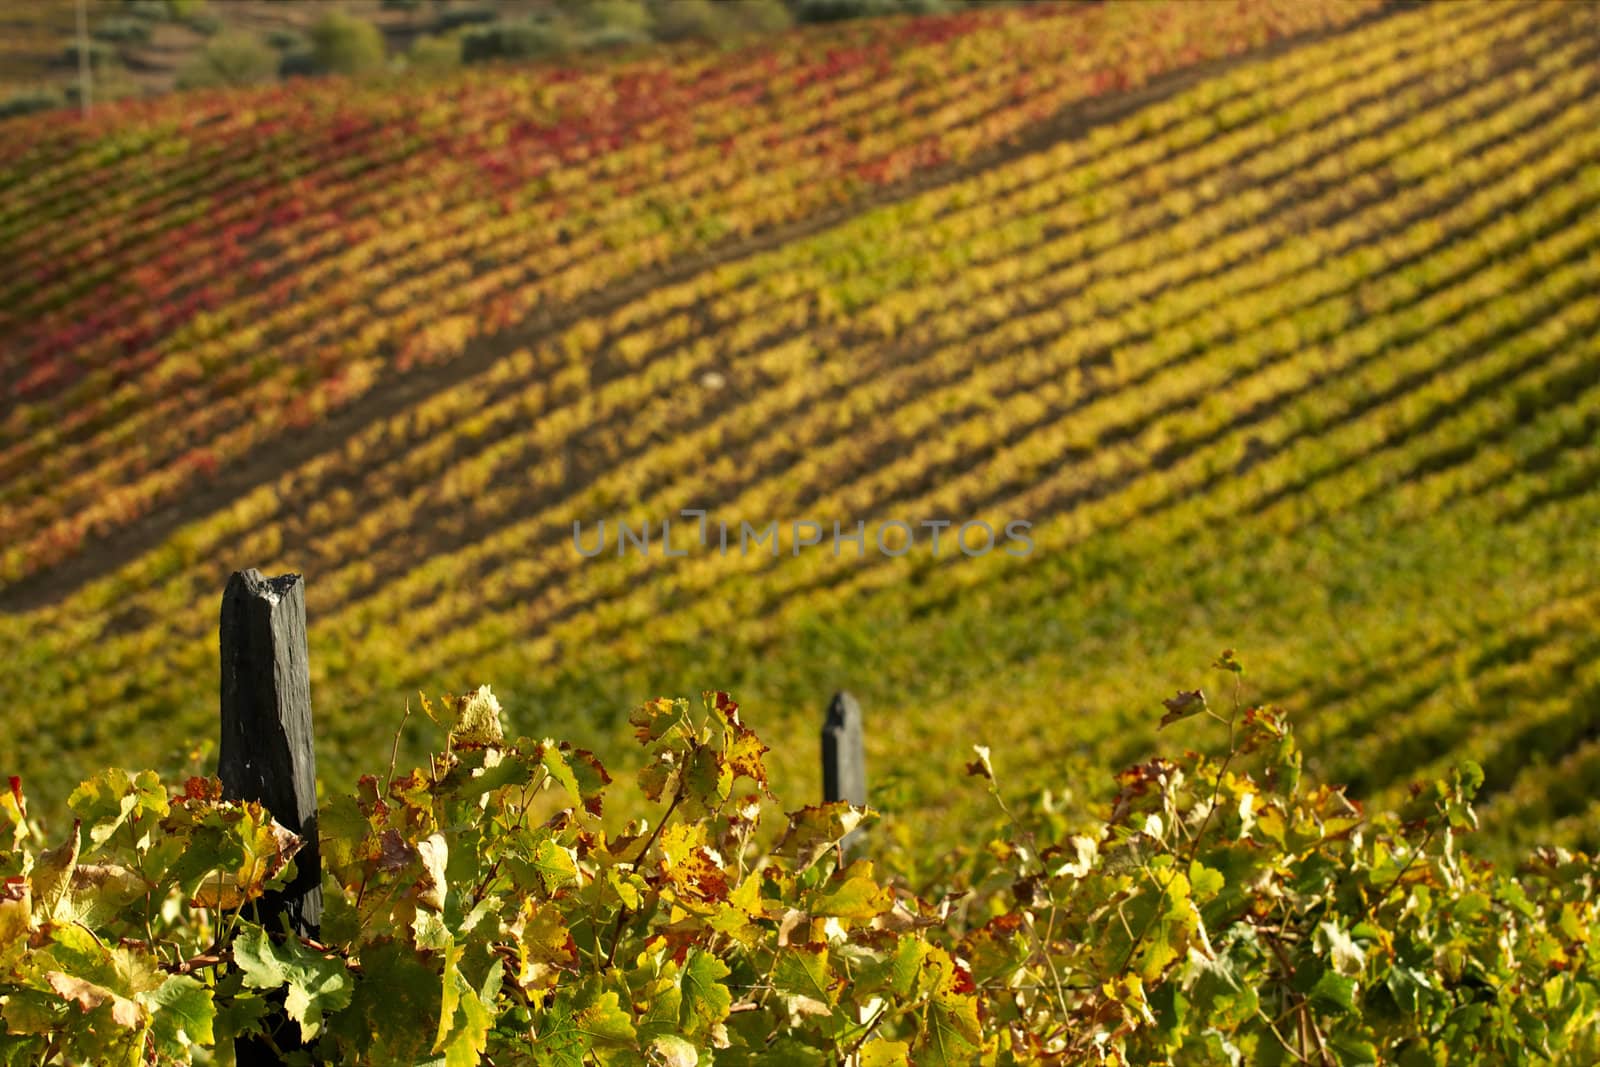 Vineyards at the Douro Valley in autumn colors